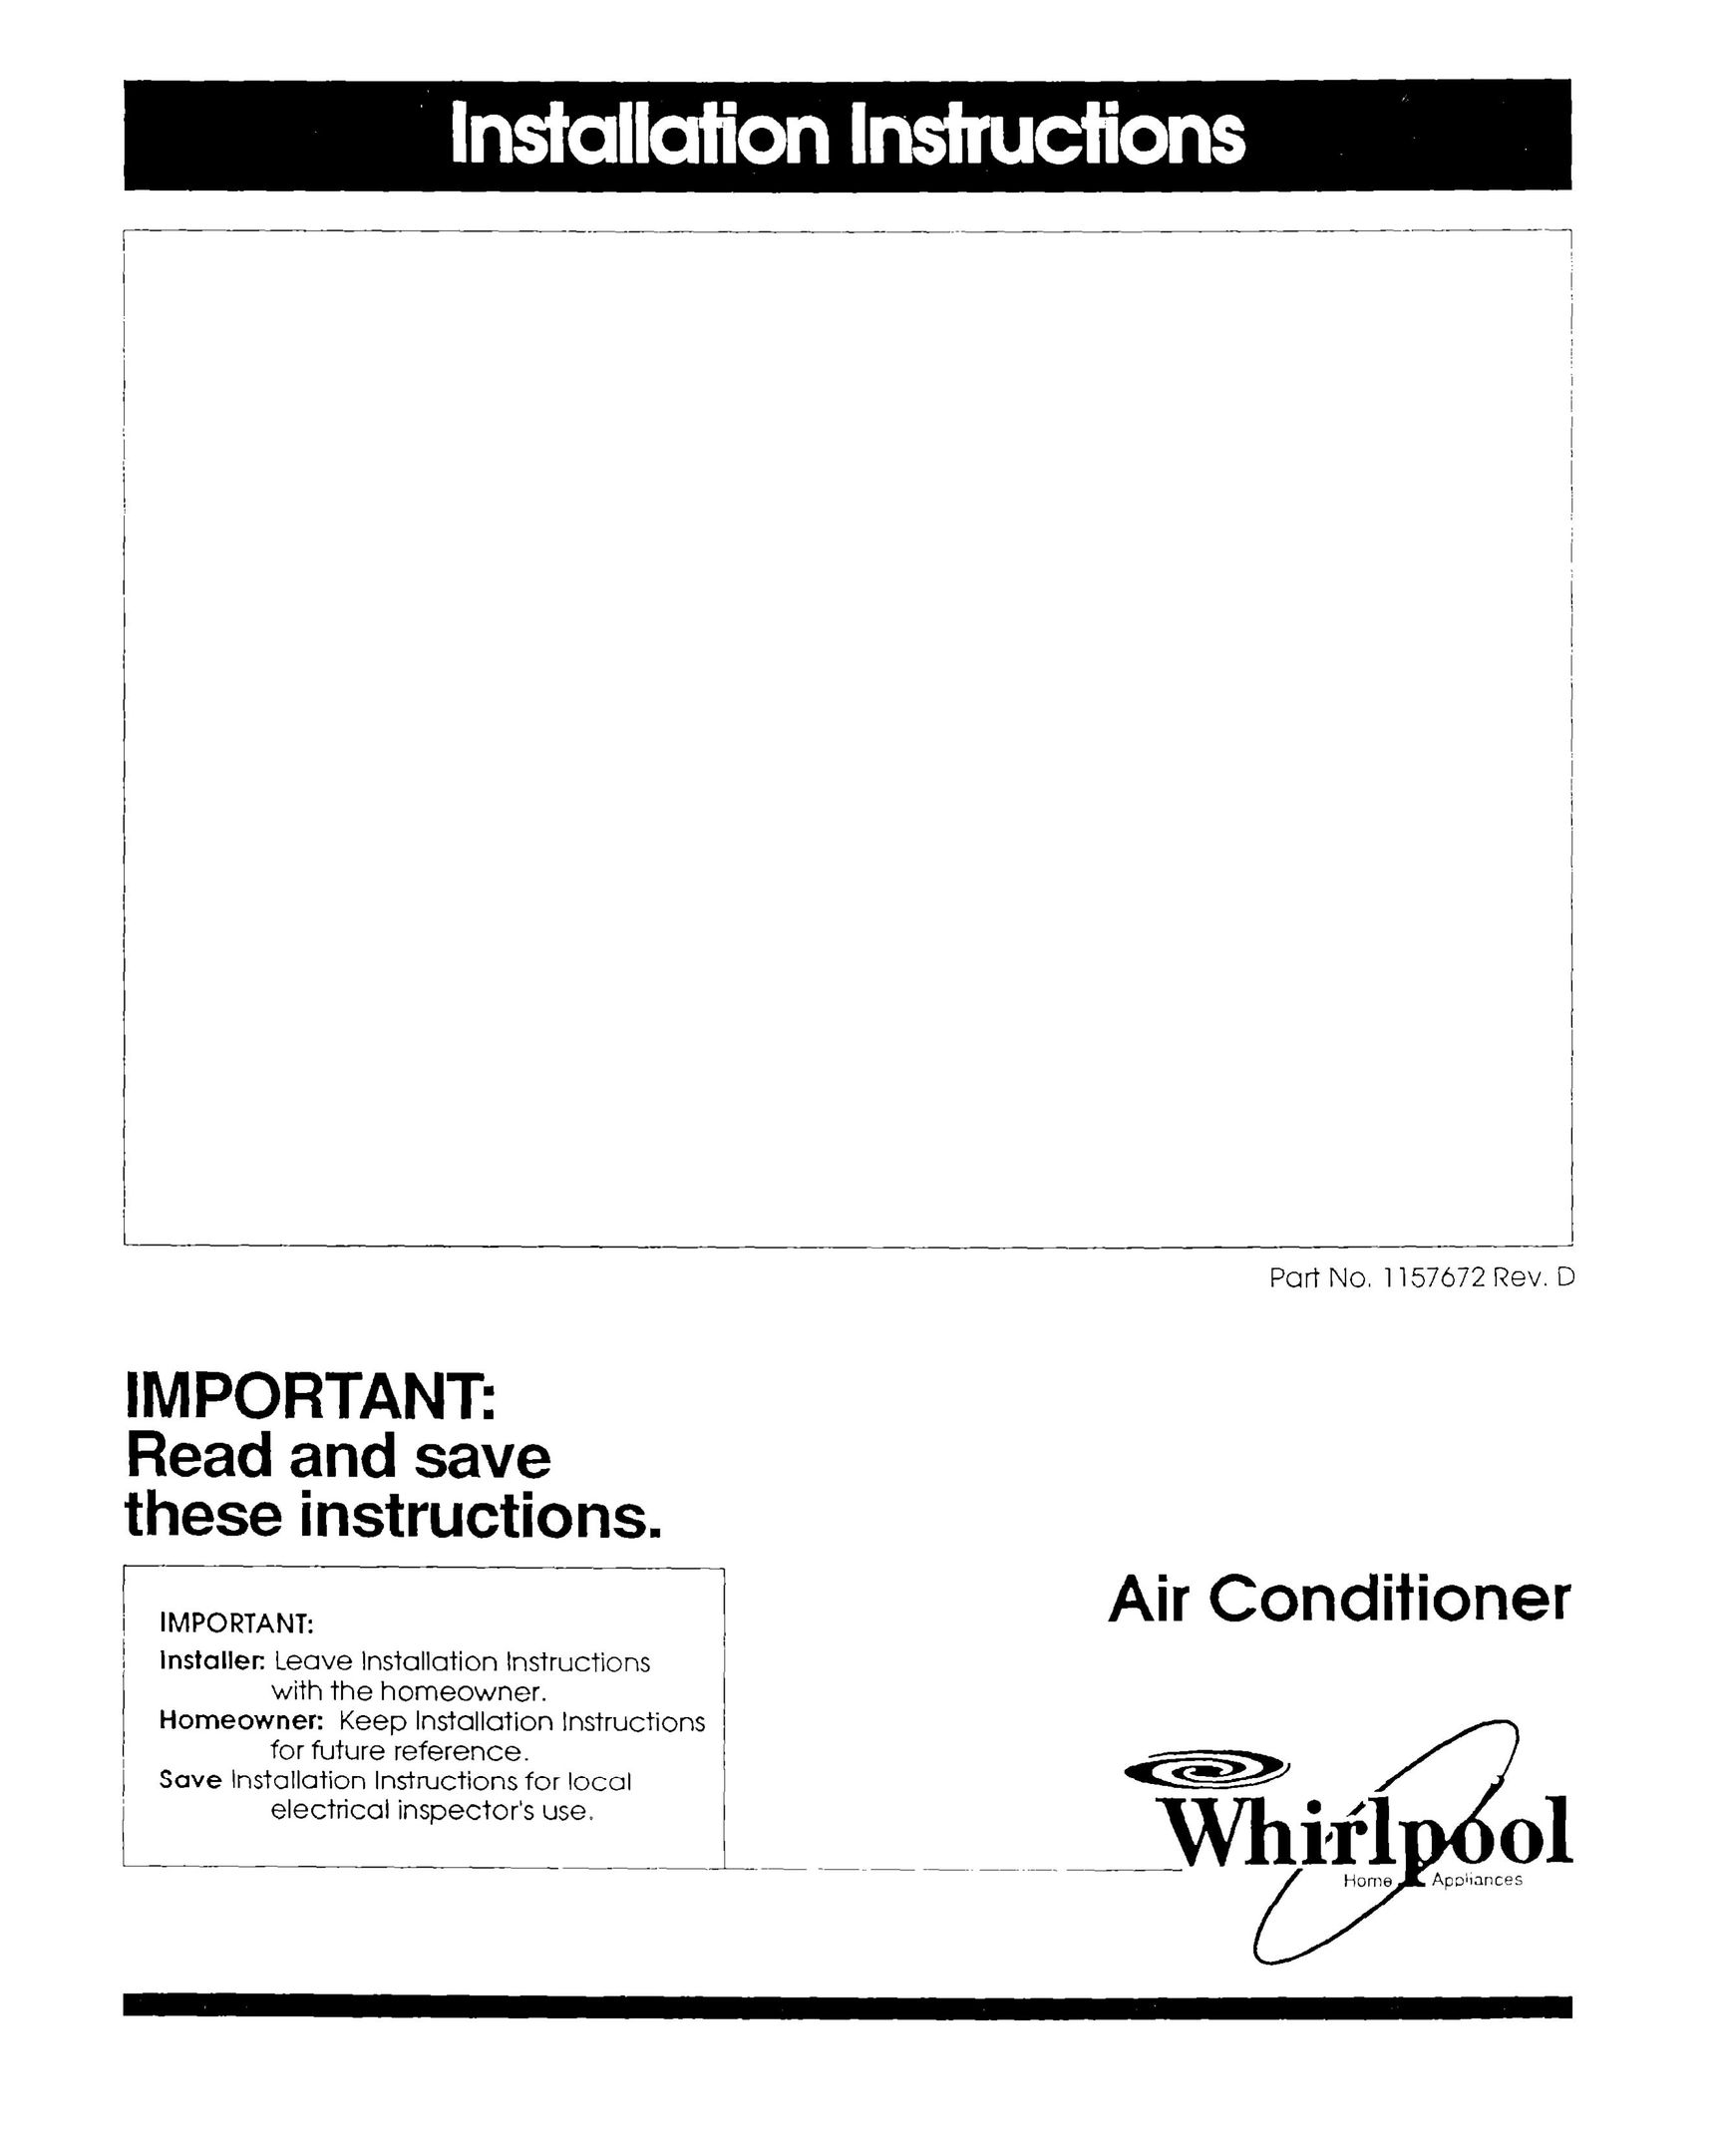 Whirlpool 1157672 Air Conditioner User Manual